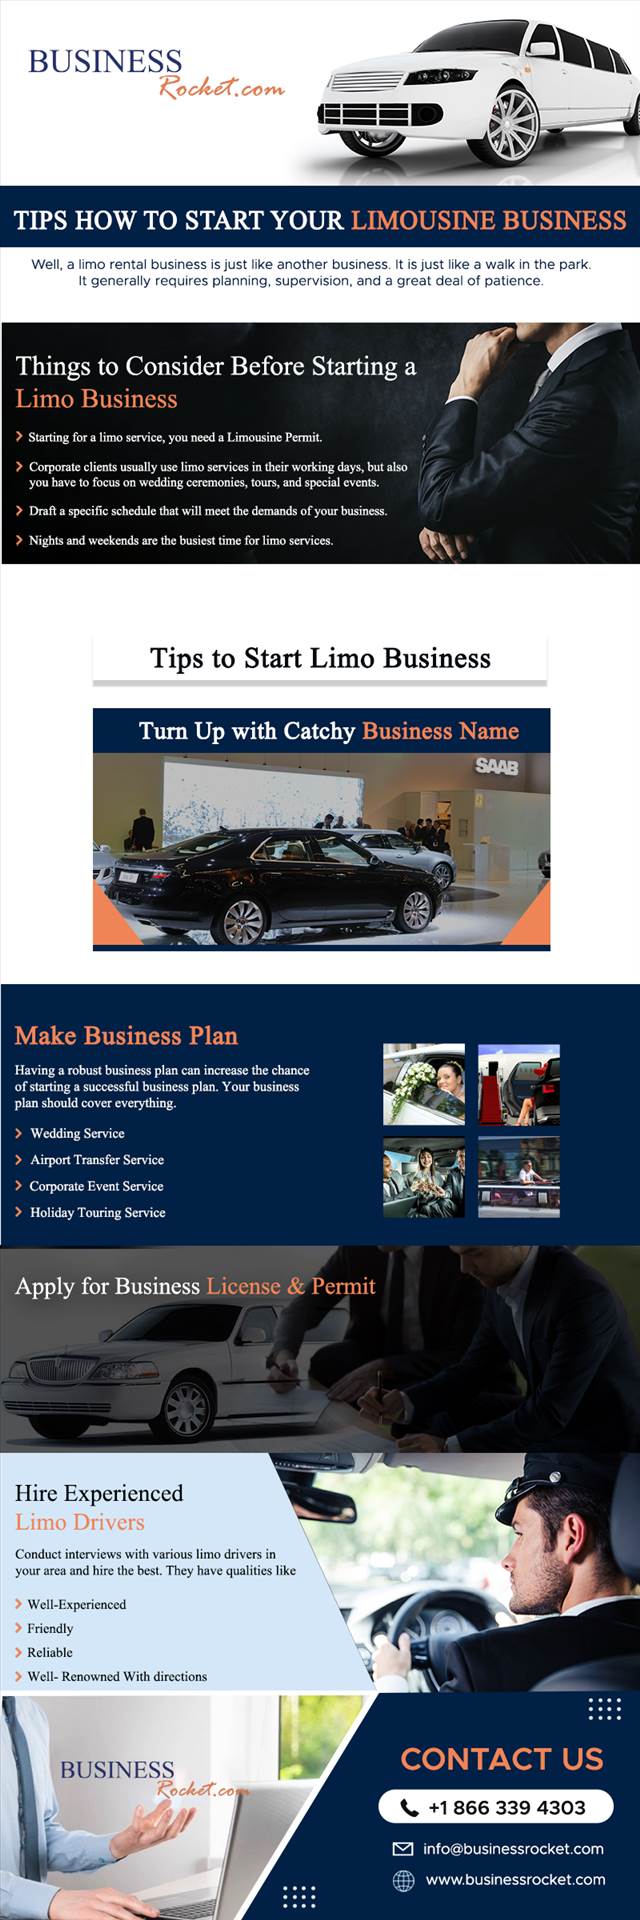 Tips How to Start Your Limousine Business.png  by businessrocketusa